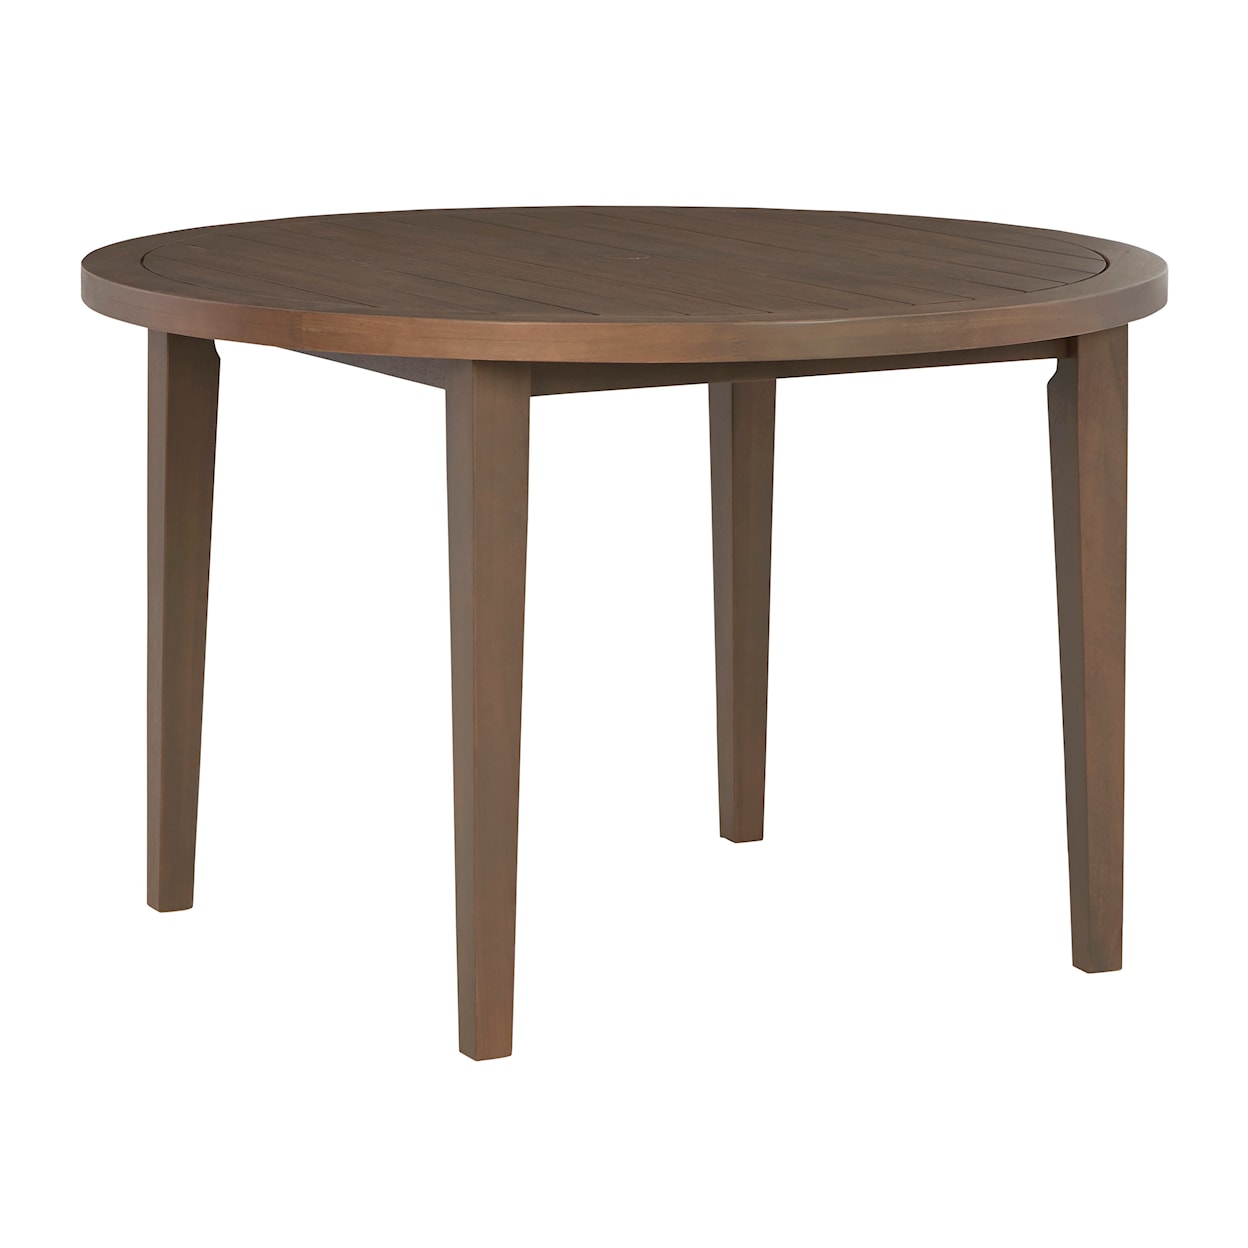 Signature Design by Ashley Germalia Outdoor Dining Table